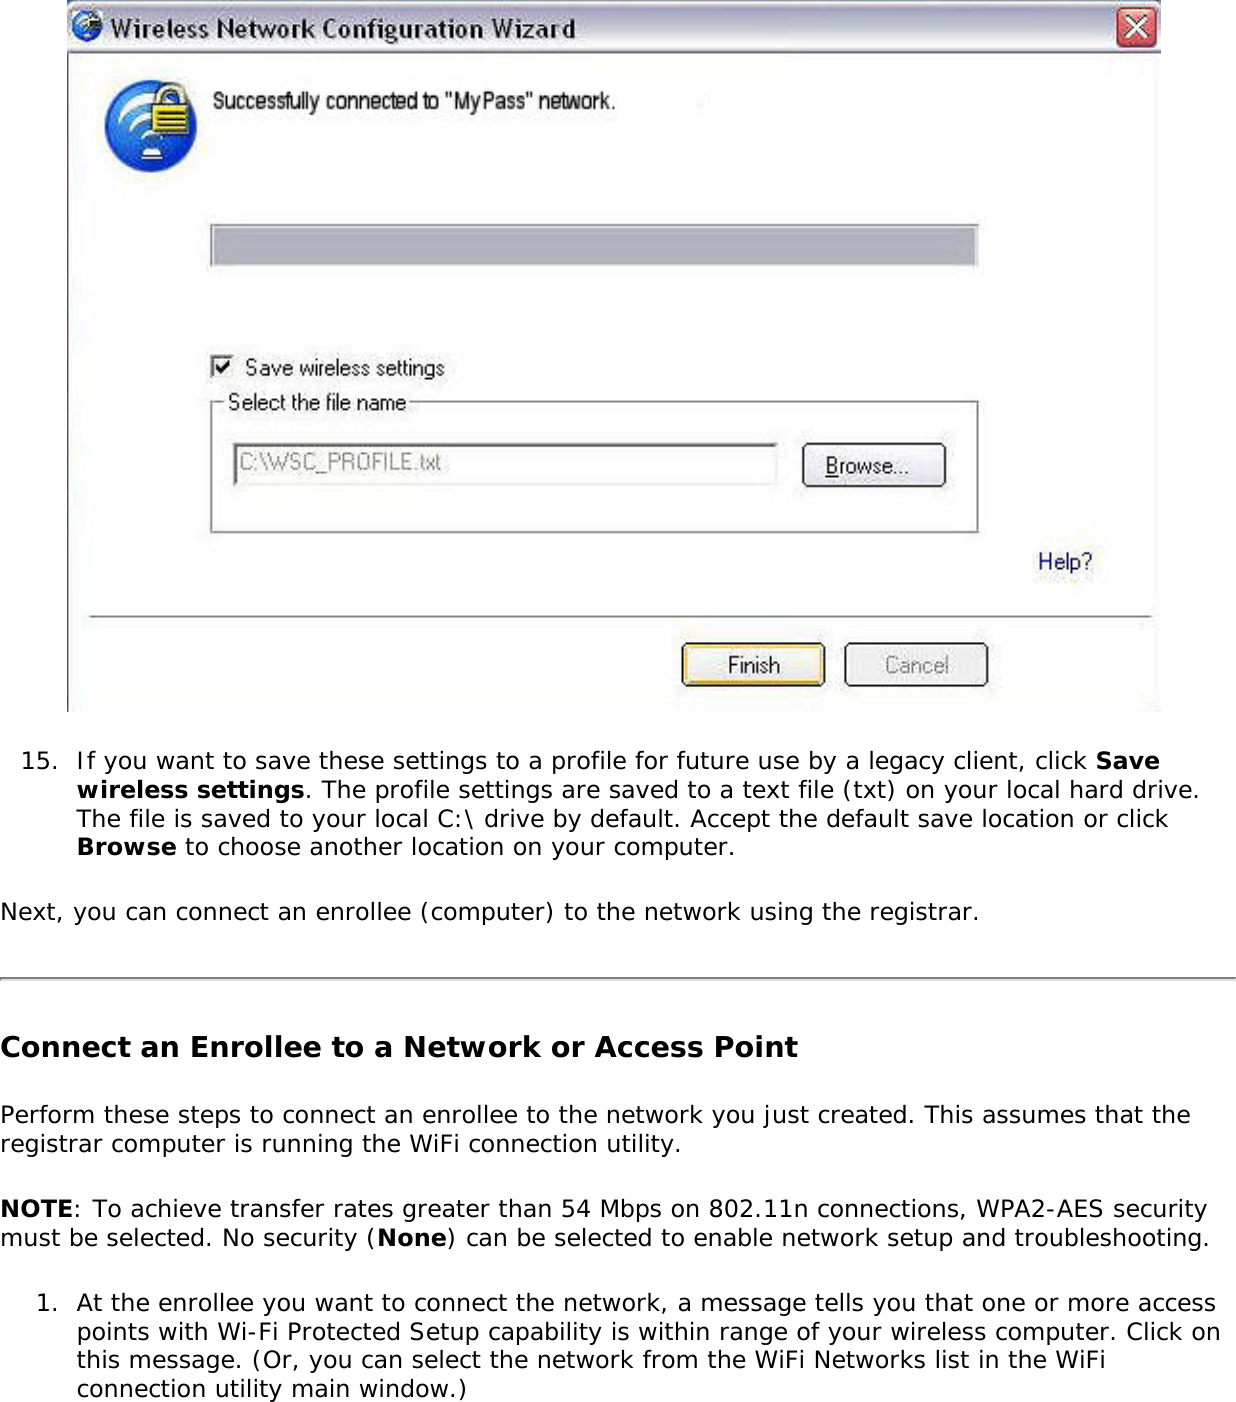 15.  If you want to save these settings to a profile for future use by a legacy client, click Save wireless settings. The profile settings are saved to a text file (txt) on your local hard drive. The file is saved to your local C:\ drive by default. Accept the default save location or click Browse to choose another location on your computer.Next, you can connect an enrollee (computer) to the network using the registrar. Connect an Enrollee to a Network or Access Point Perform these steps to connect an enrollee to the network you just created. This assumes that the registrar computer is running the WiFi connection utility. NOTE: To achieve transfer rates greater than 54 Mbps on 802.11n connections, WPA2-AES security must be selected. No security (None) can be selected to enable network setup and troubleshooting.1.  At the enrollee you want to connect the network, a message tells you that one or more access points with Wi-Fi Protected Setup capability is within range of your wireless computer. Click on this message. (Or, you can select the network from the WiFi Networks list in the WiFi connection utility main window.) 